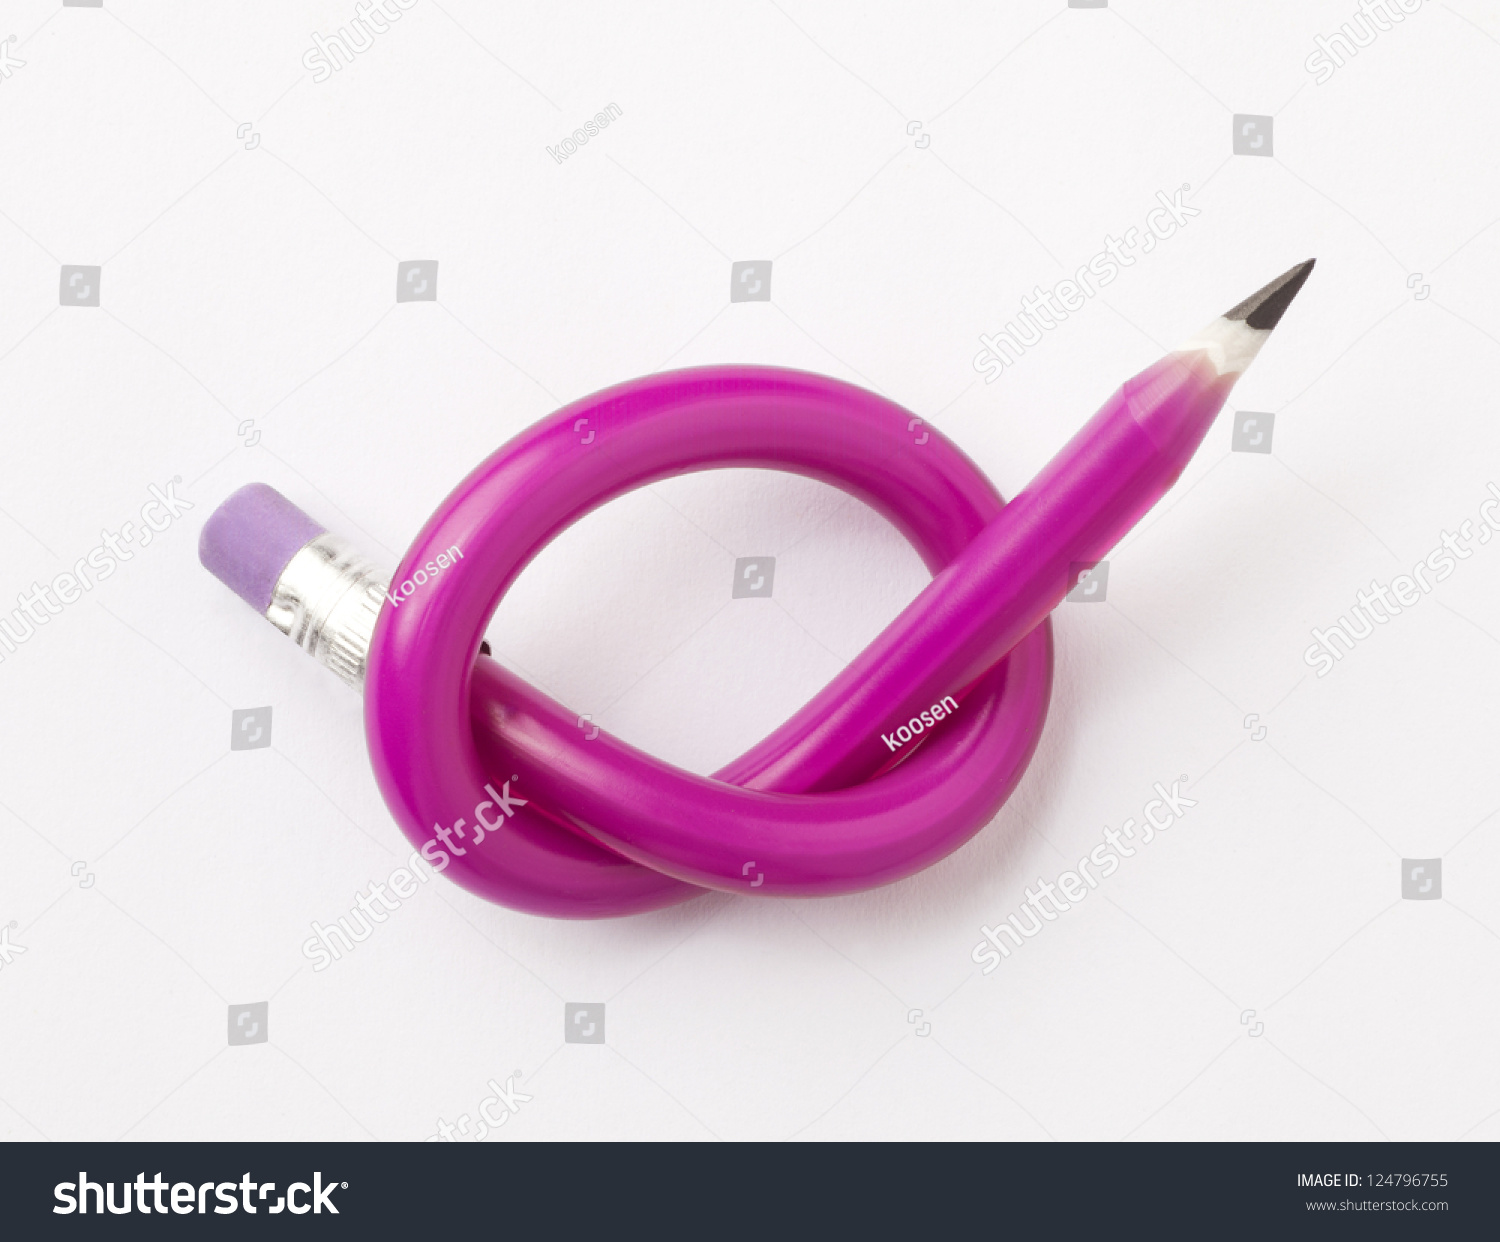 Pencil Tied In Knot Stock Photo 124796755 : Shutterstock